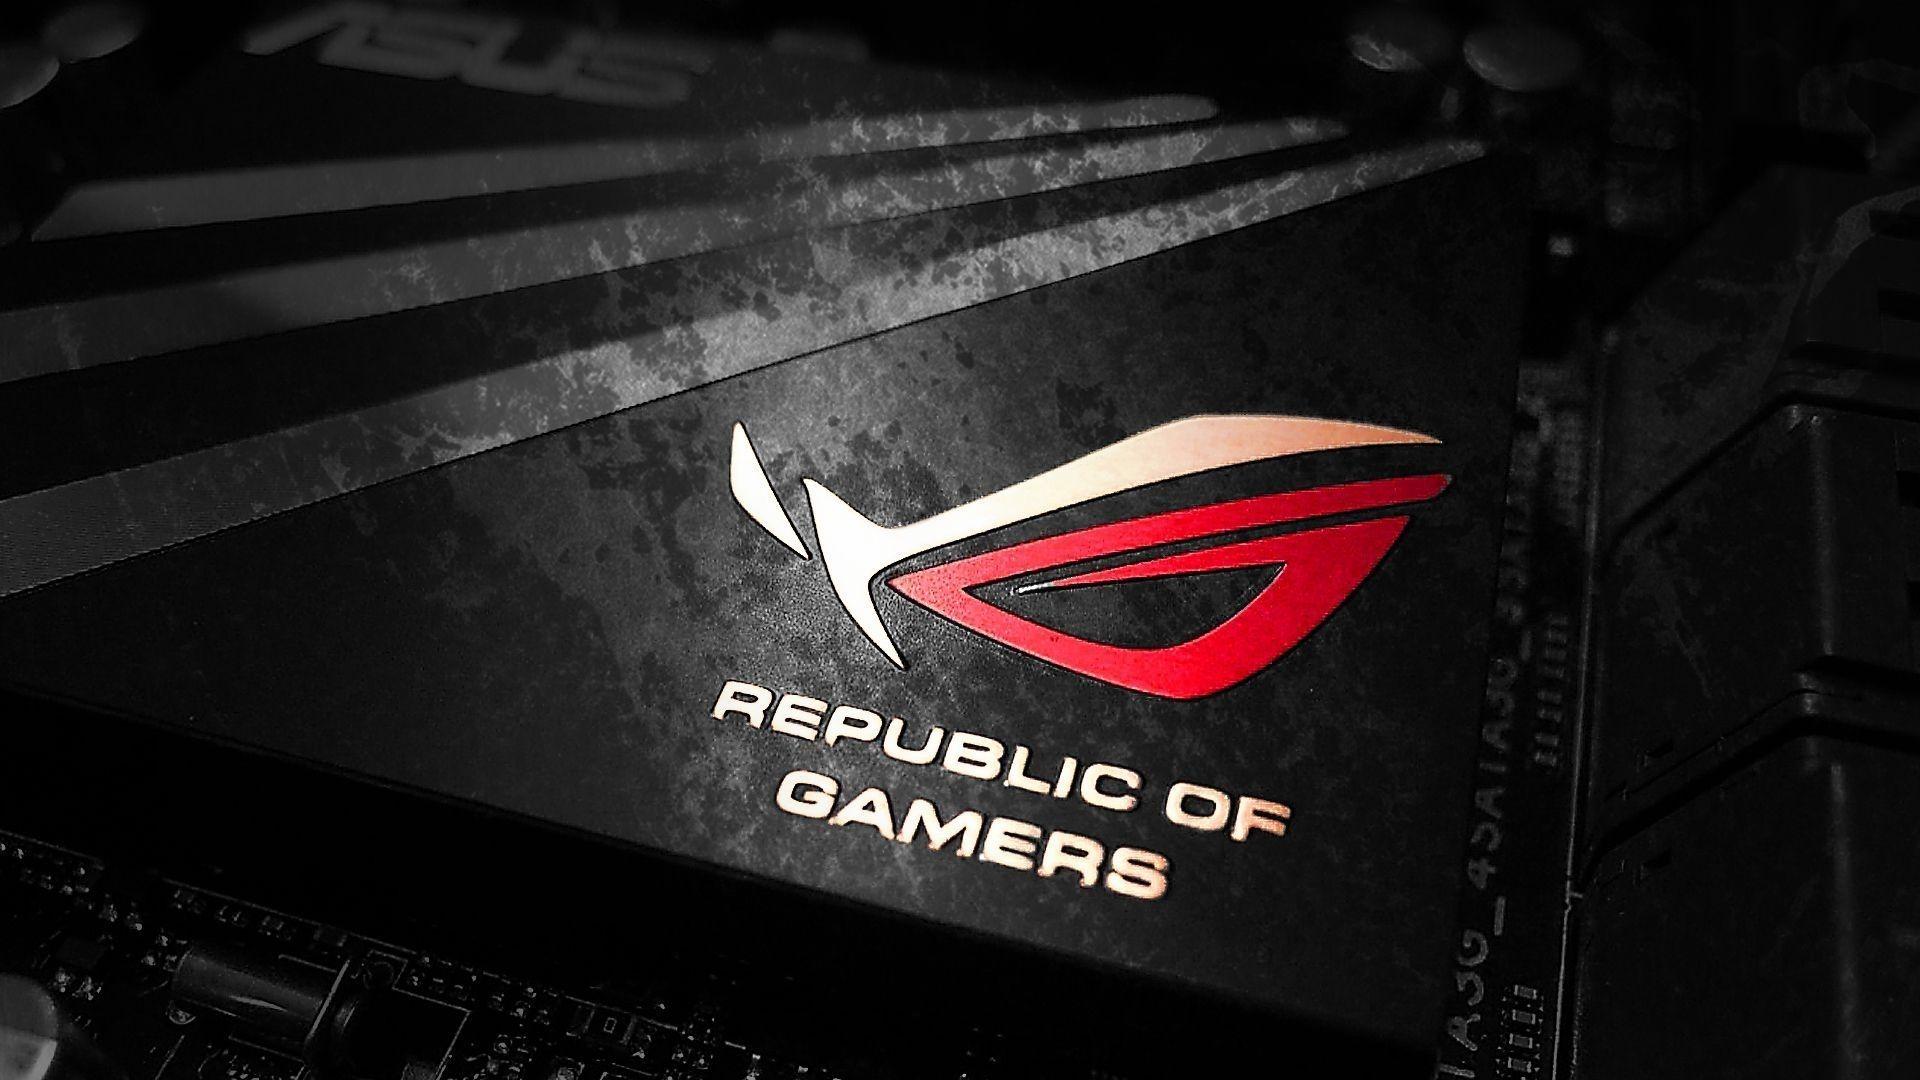 New Rog Wallpaper HD 1920X1080 FULL HD 1080p For PC Background